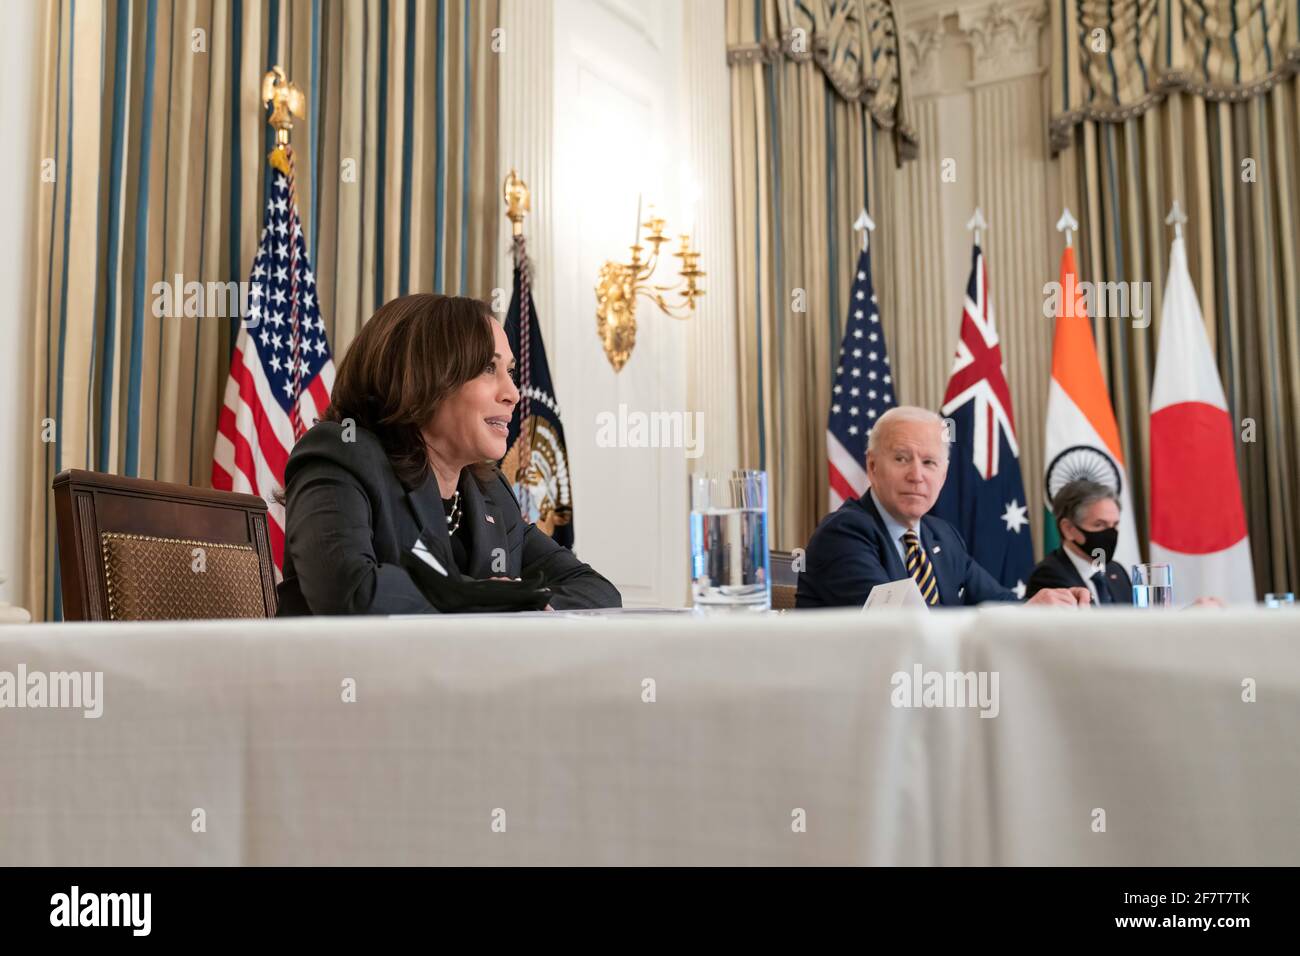 President Joe Biden, joined by Vice President Kamala Harris, Secretary of State Antony Blinken and White House staff, participates in the virtual Quad Summit with Australia, India, and Japan Friday, March 12, 2021, in the State Dining Room of the White House. (Official White House Photo by Adam Schultz) Stock Photo